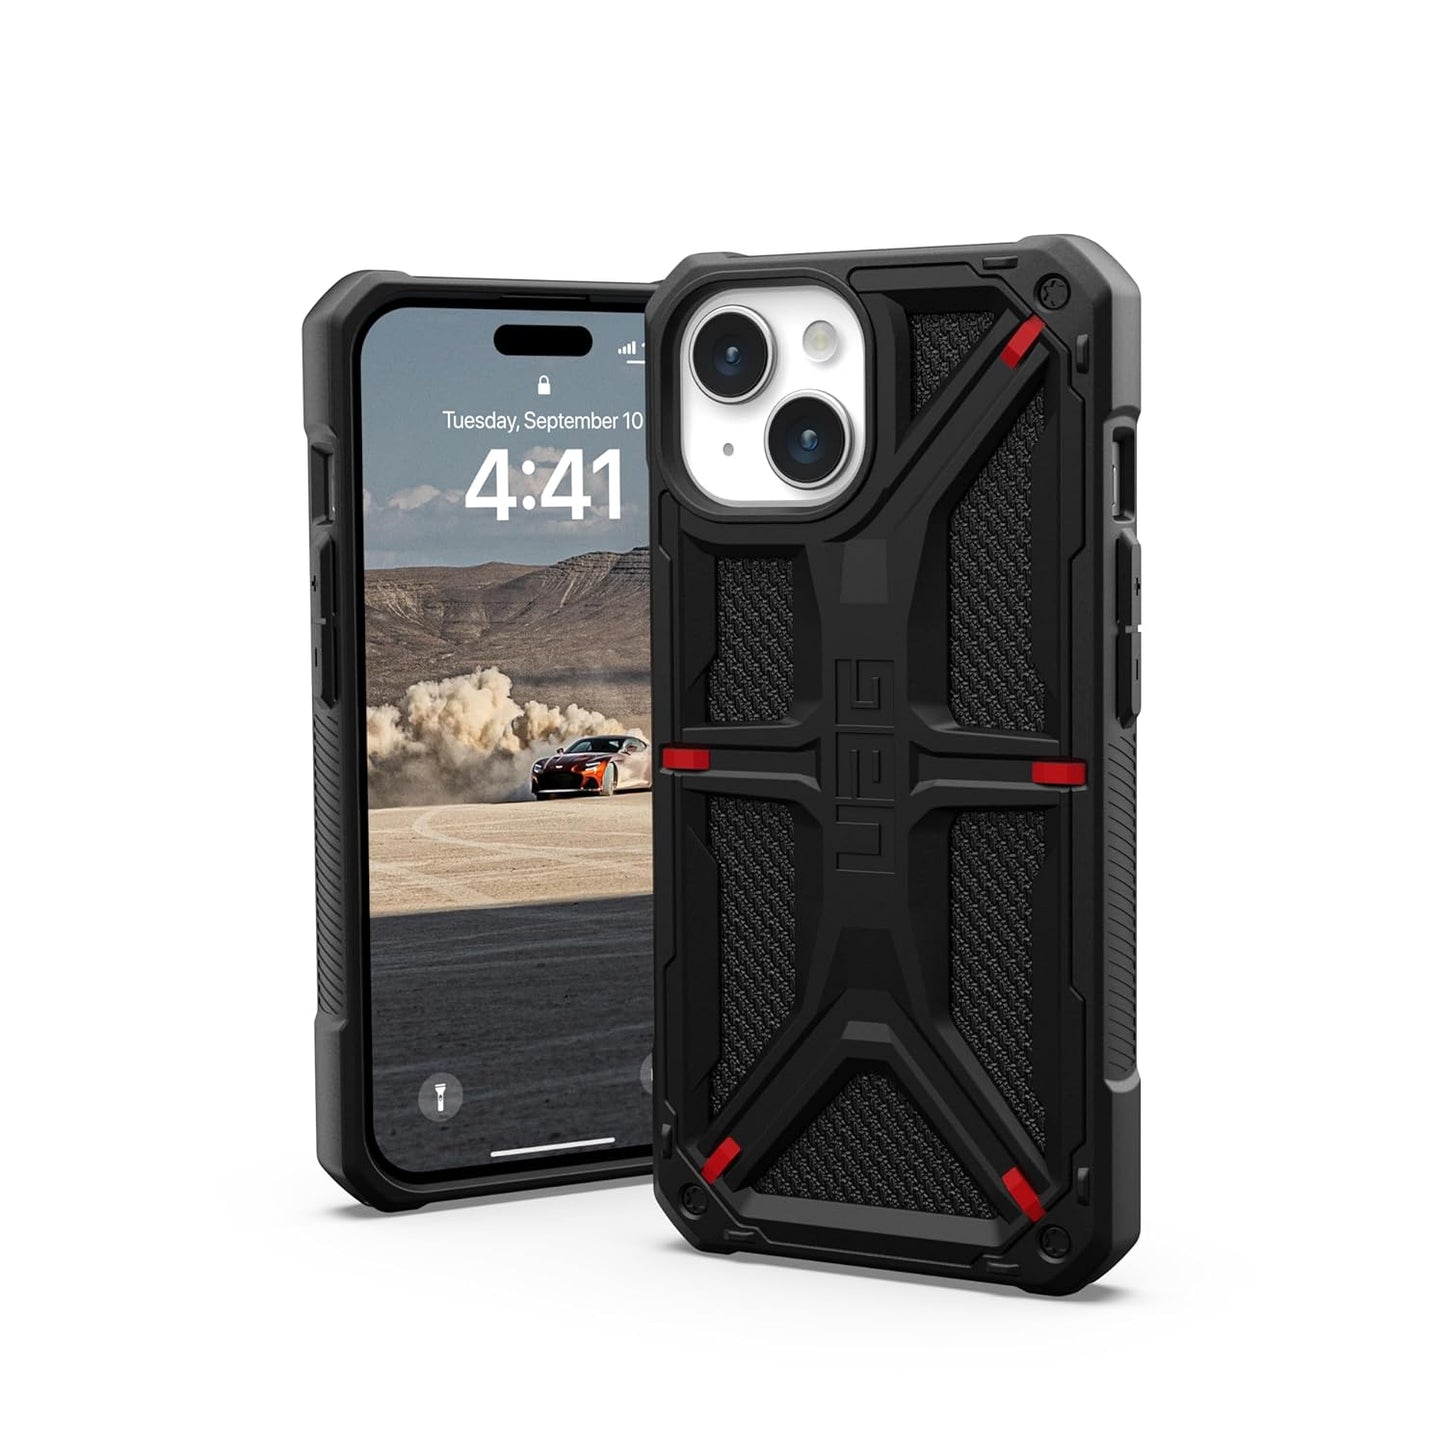 iPhone 15 Pro Max Armor Cover, Original Urban Armor Slim Fit Rugged  Protective Case/Cover Designed For Apple iPhone 15 Pro Max UAG Black at Rs  1499.00, iPhone Mobile Cover & Cases